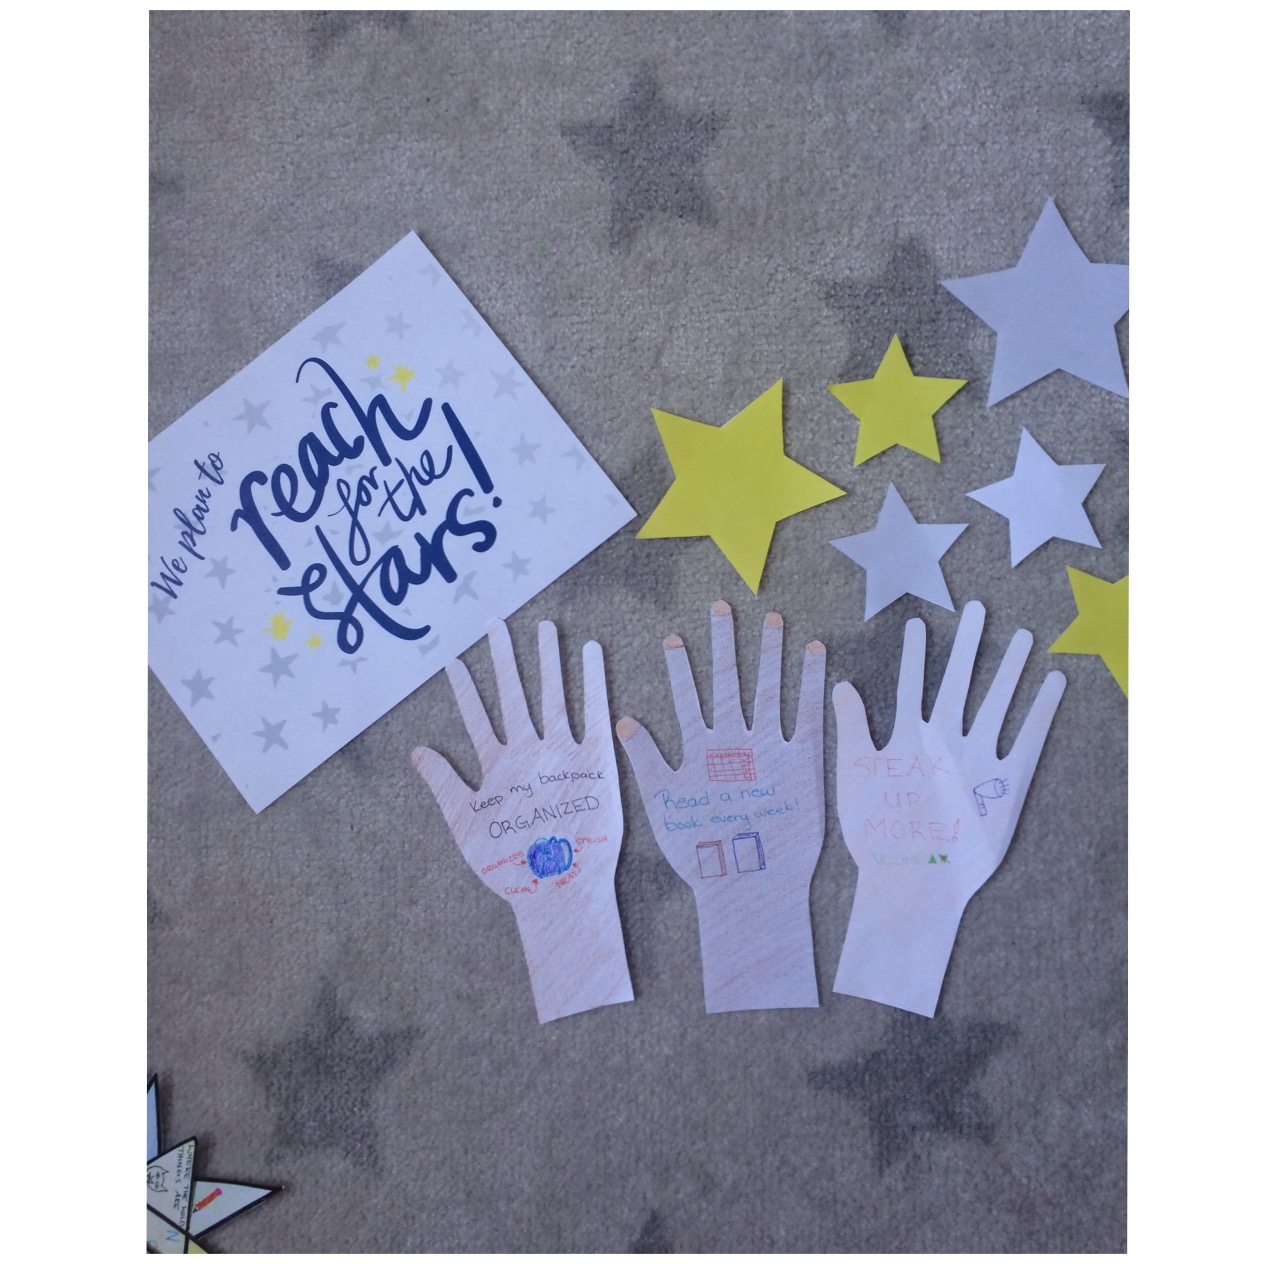 Awesome ideas to create the best star themed classroom.